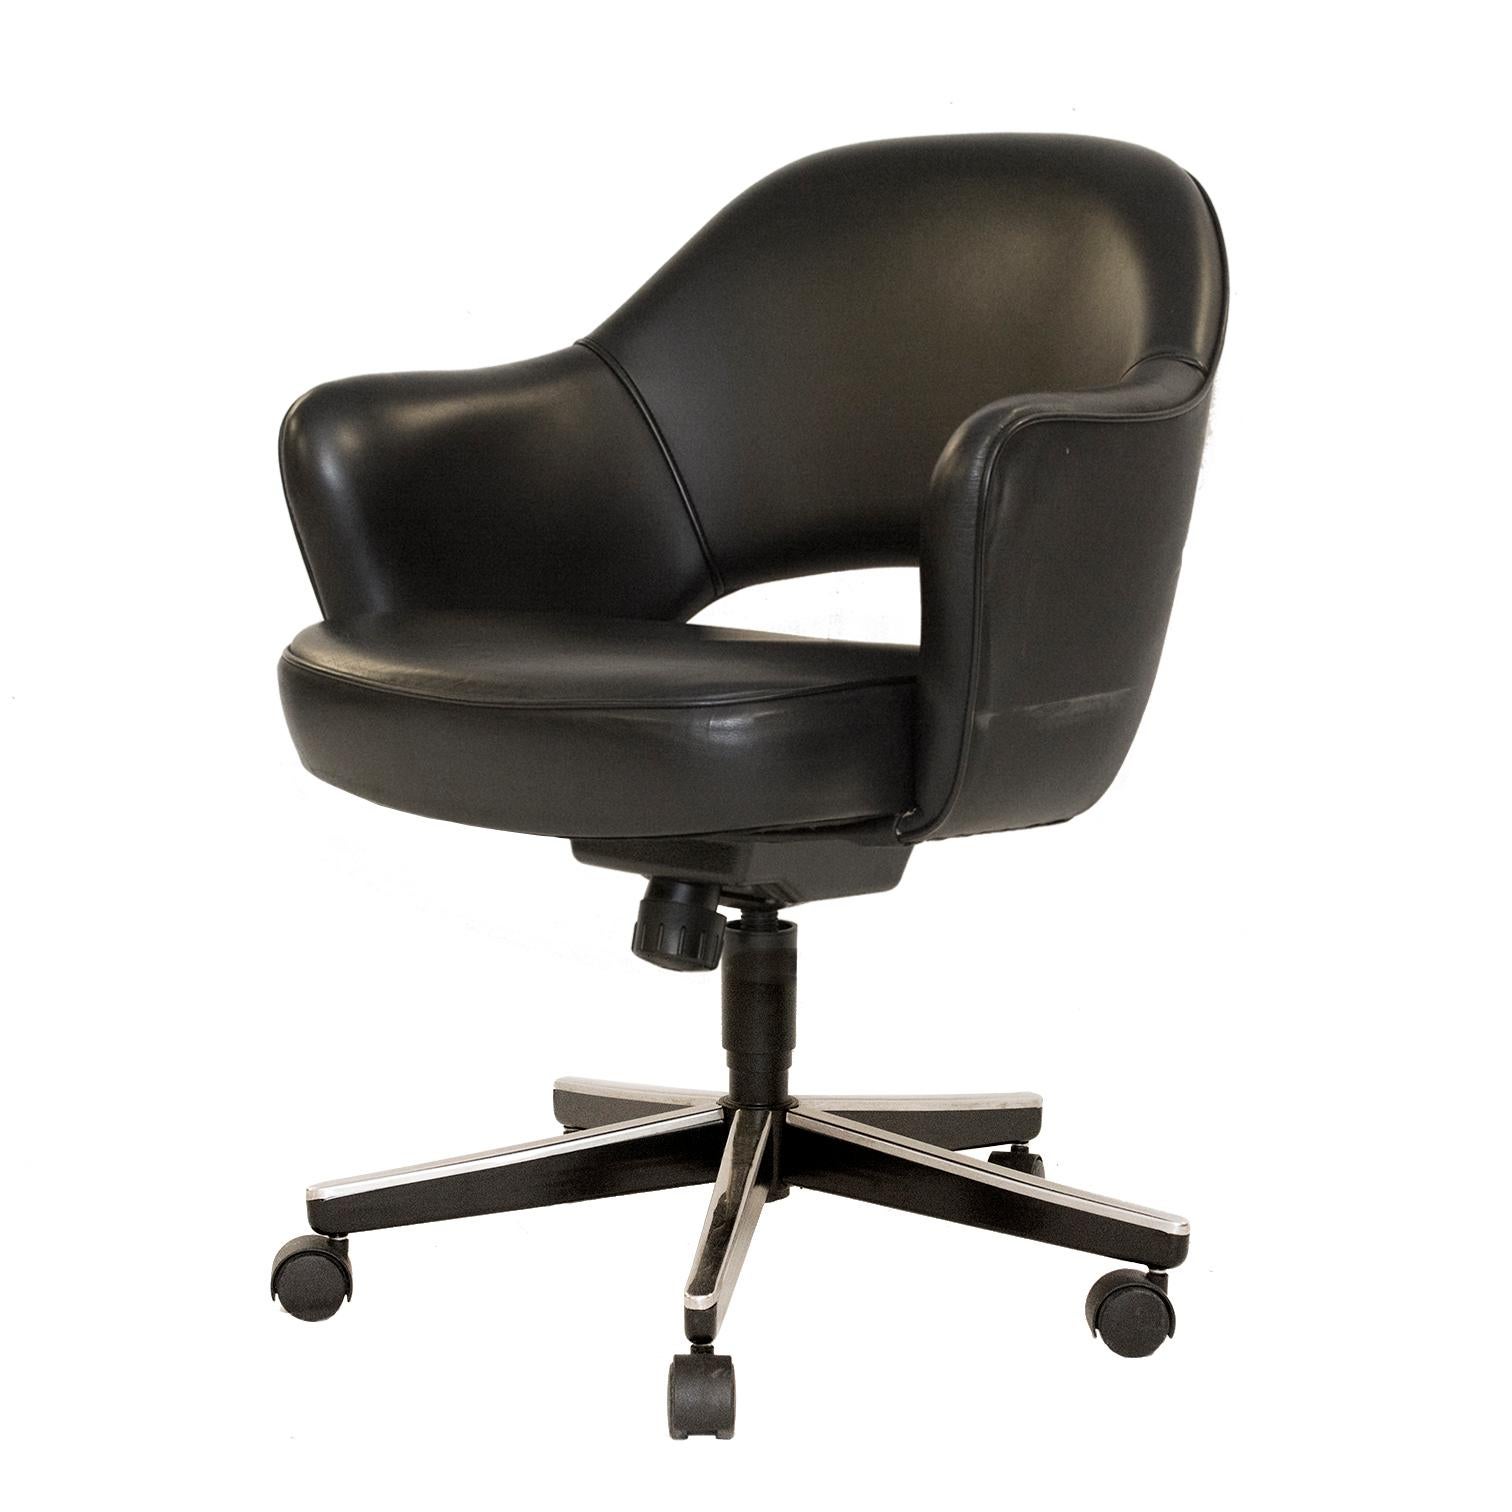 Gorgeous Knoll Saarinen office chair on a contemporary swivel base. These classic chairs come in their original supple black leather and the bases have received a thorough polish. This chair features a contemporary iteration swivel base and is